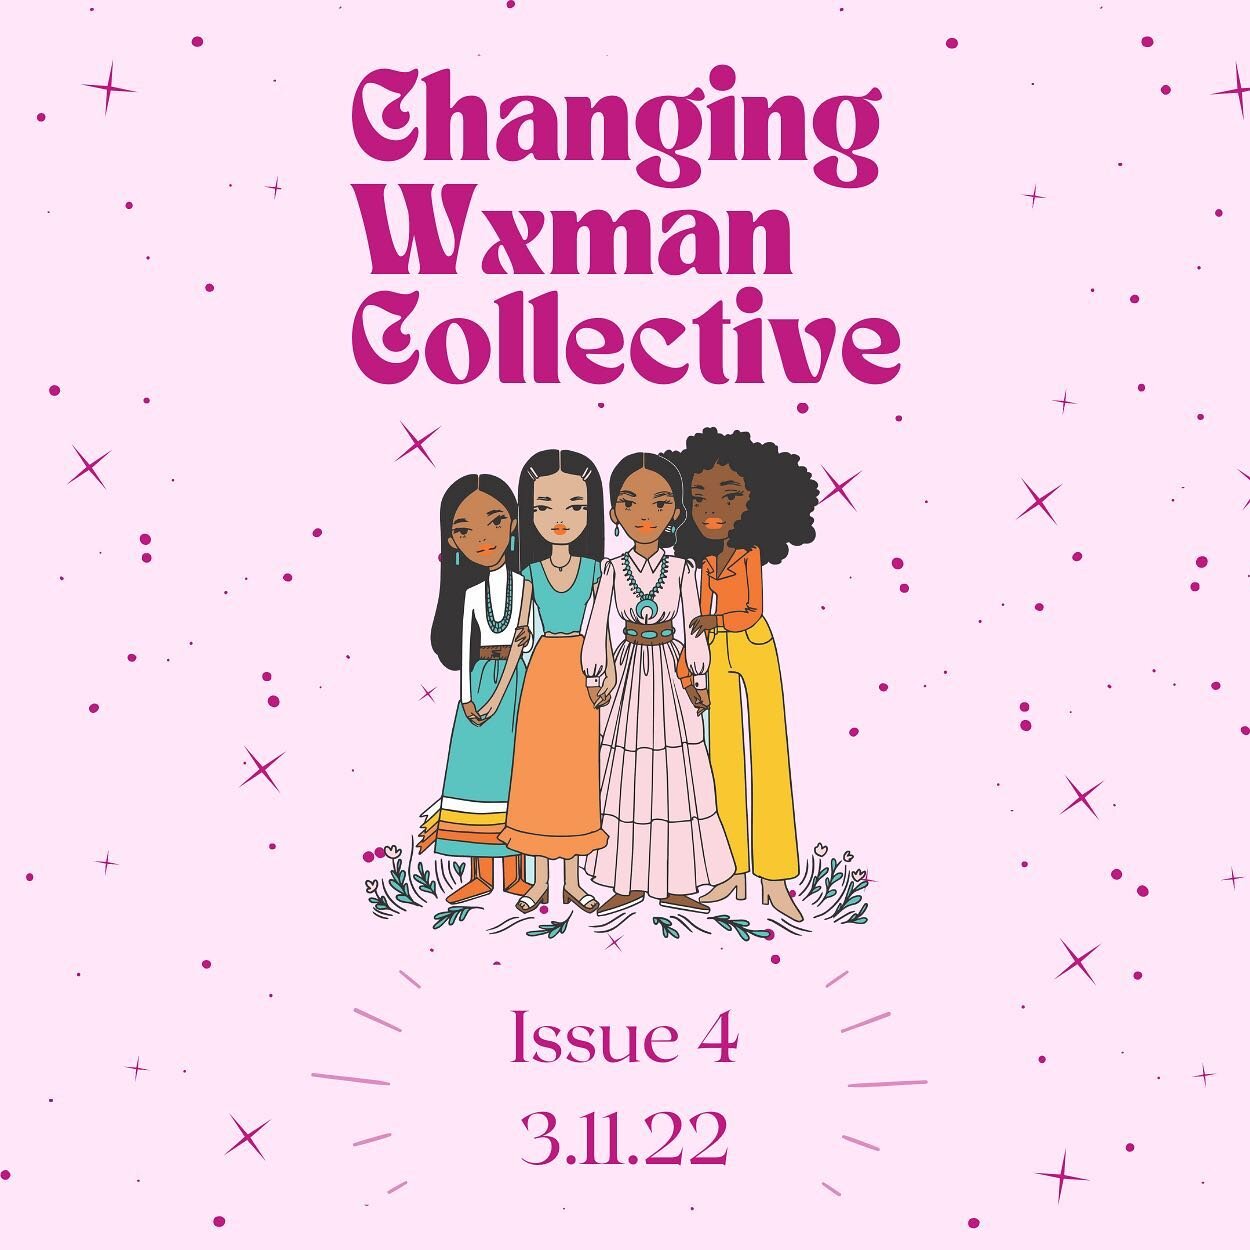 Our new issue is live on our website (www.changingwxmancollective.org) next Friday, March 11th!

Thank you to all of the featured artists, team members, and our collaborators for making this happen. We can&rsquo;t wait for you to see the new issue, w